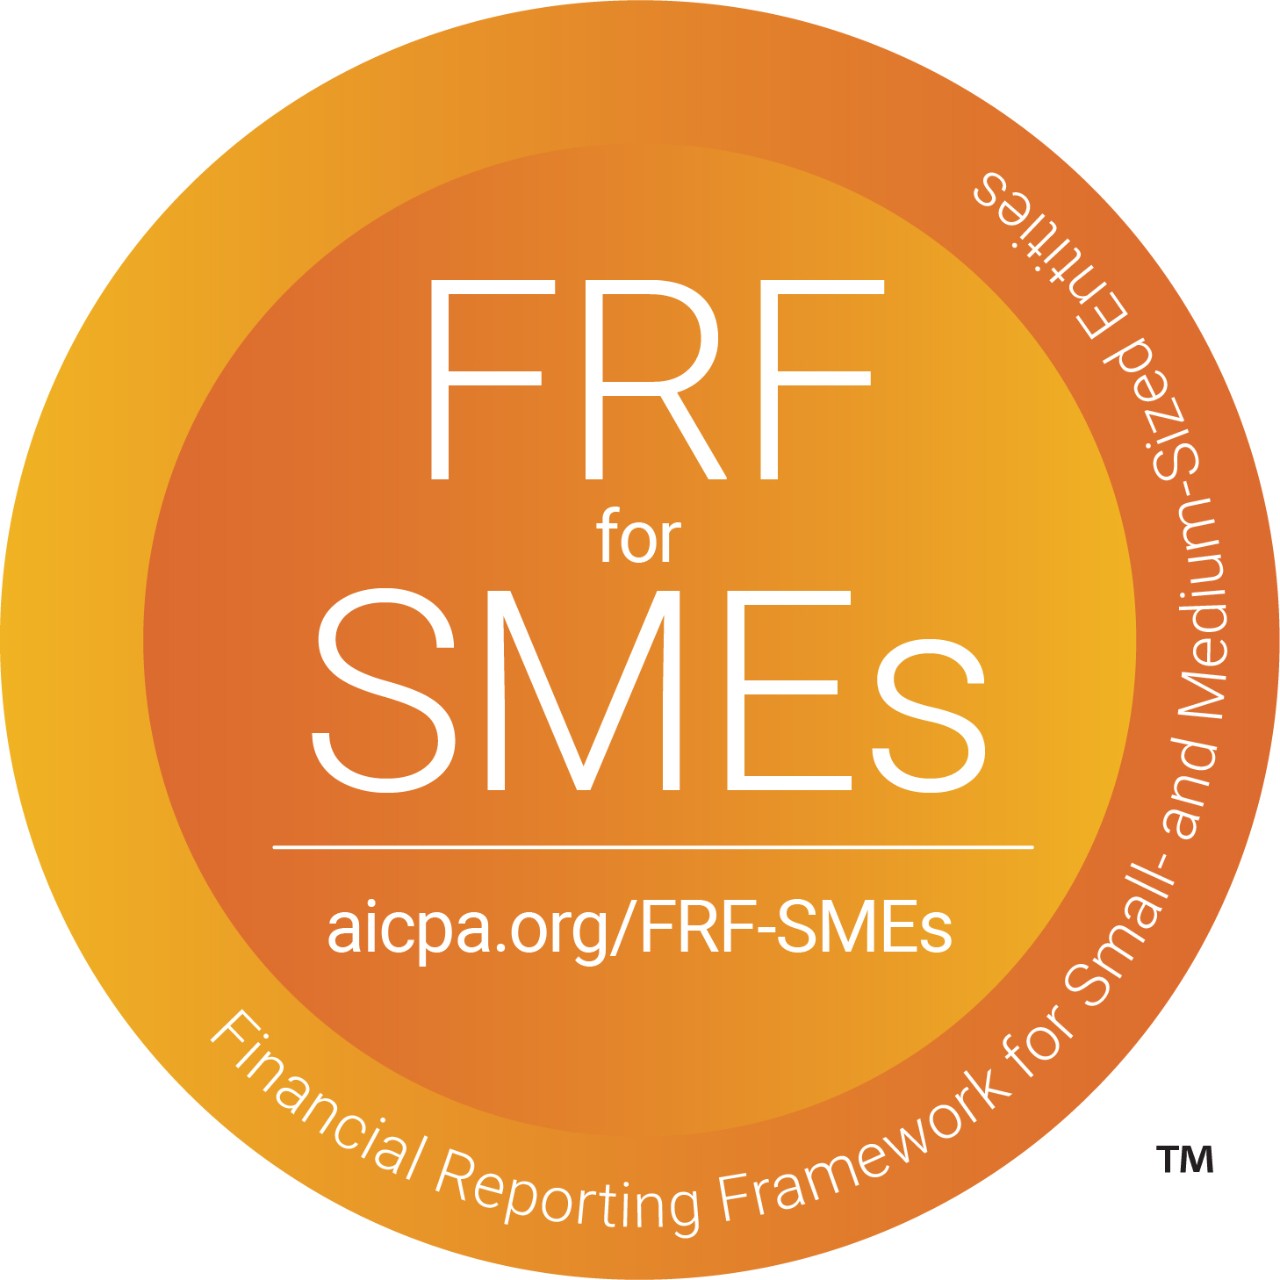 FRF for SMEs home